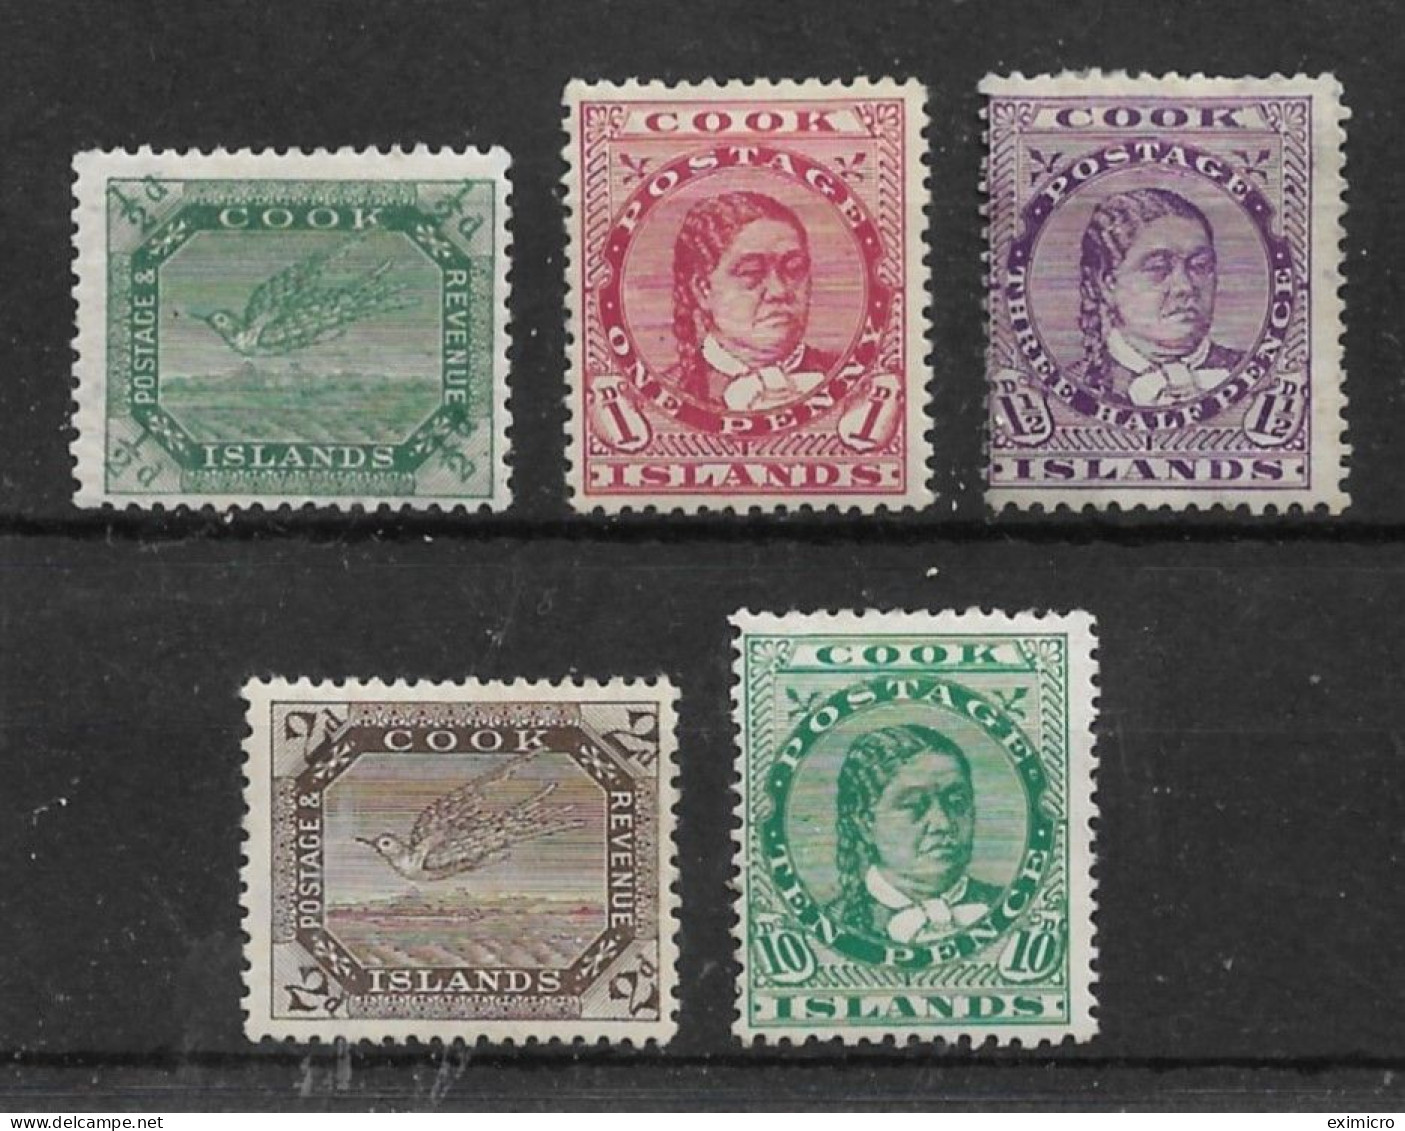 COOK ISLANDS 1913 - 1919 VALUES TO 10d SG 39a, 41, 43, 44, 45 MOUNTED MINT Cat £96 - Cookeilanden